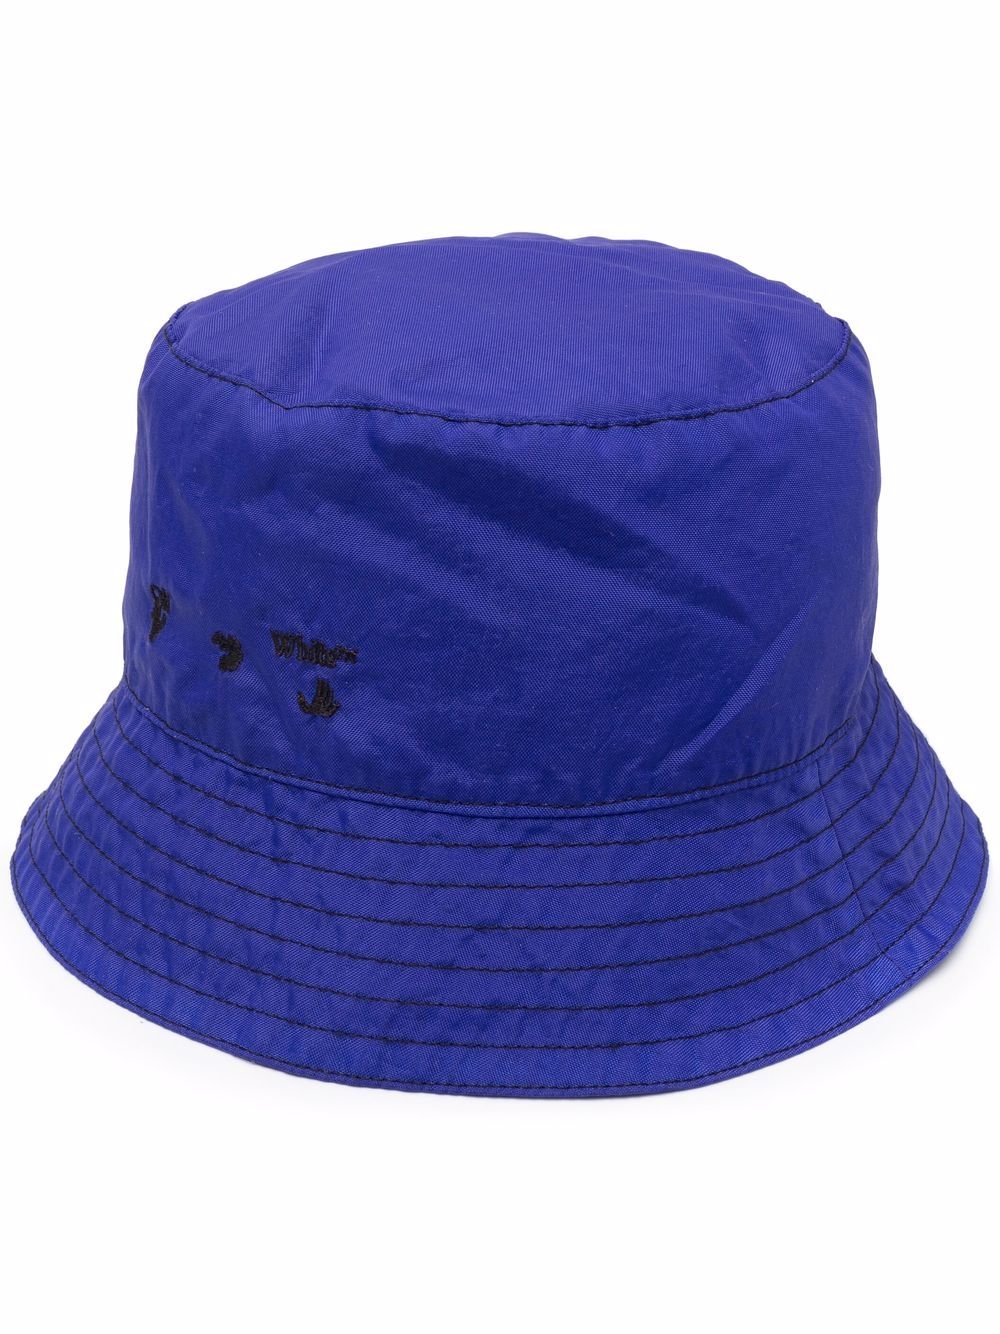 OFF-WHITE OW Polyester Bucket Hat Blue/Black